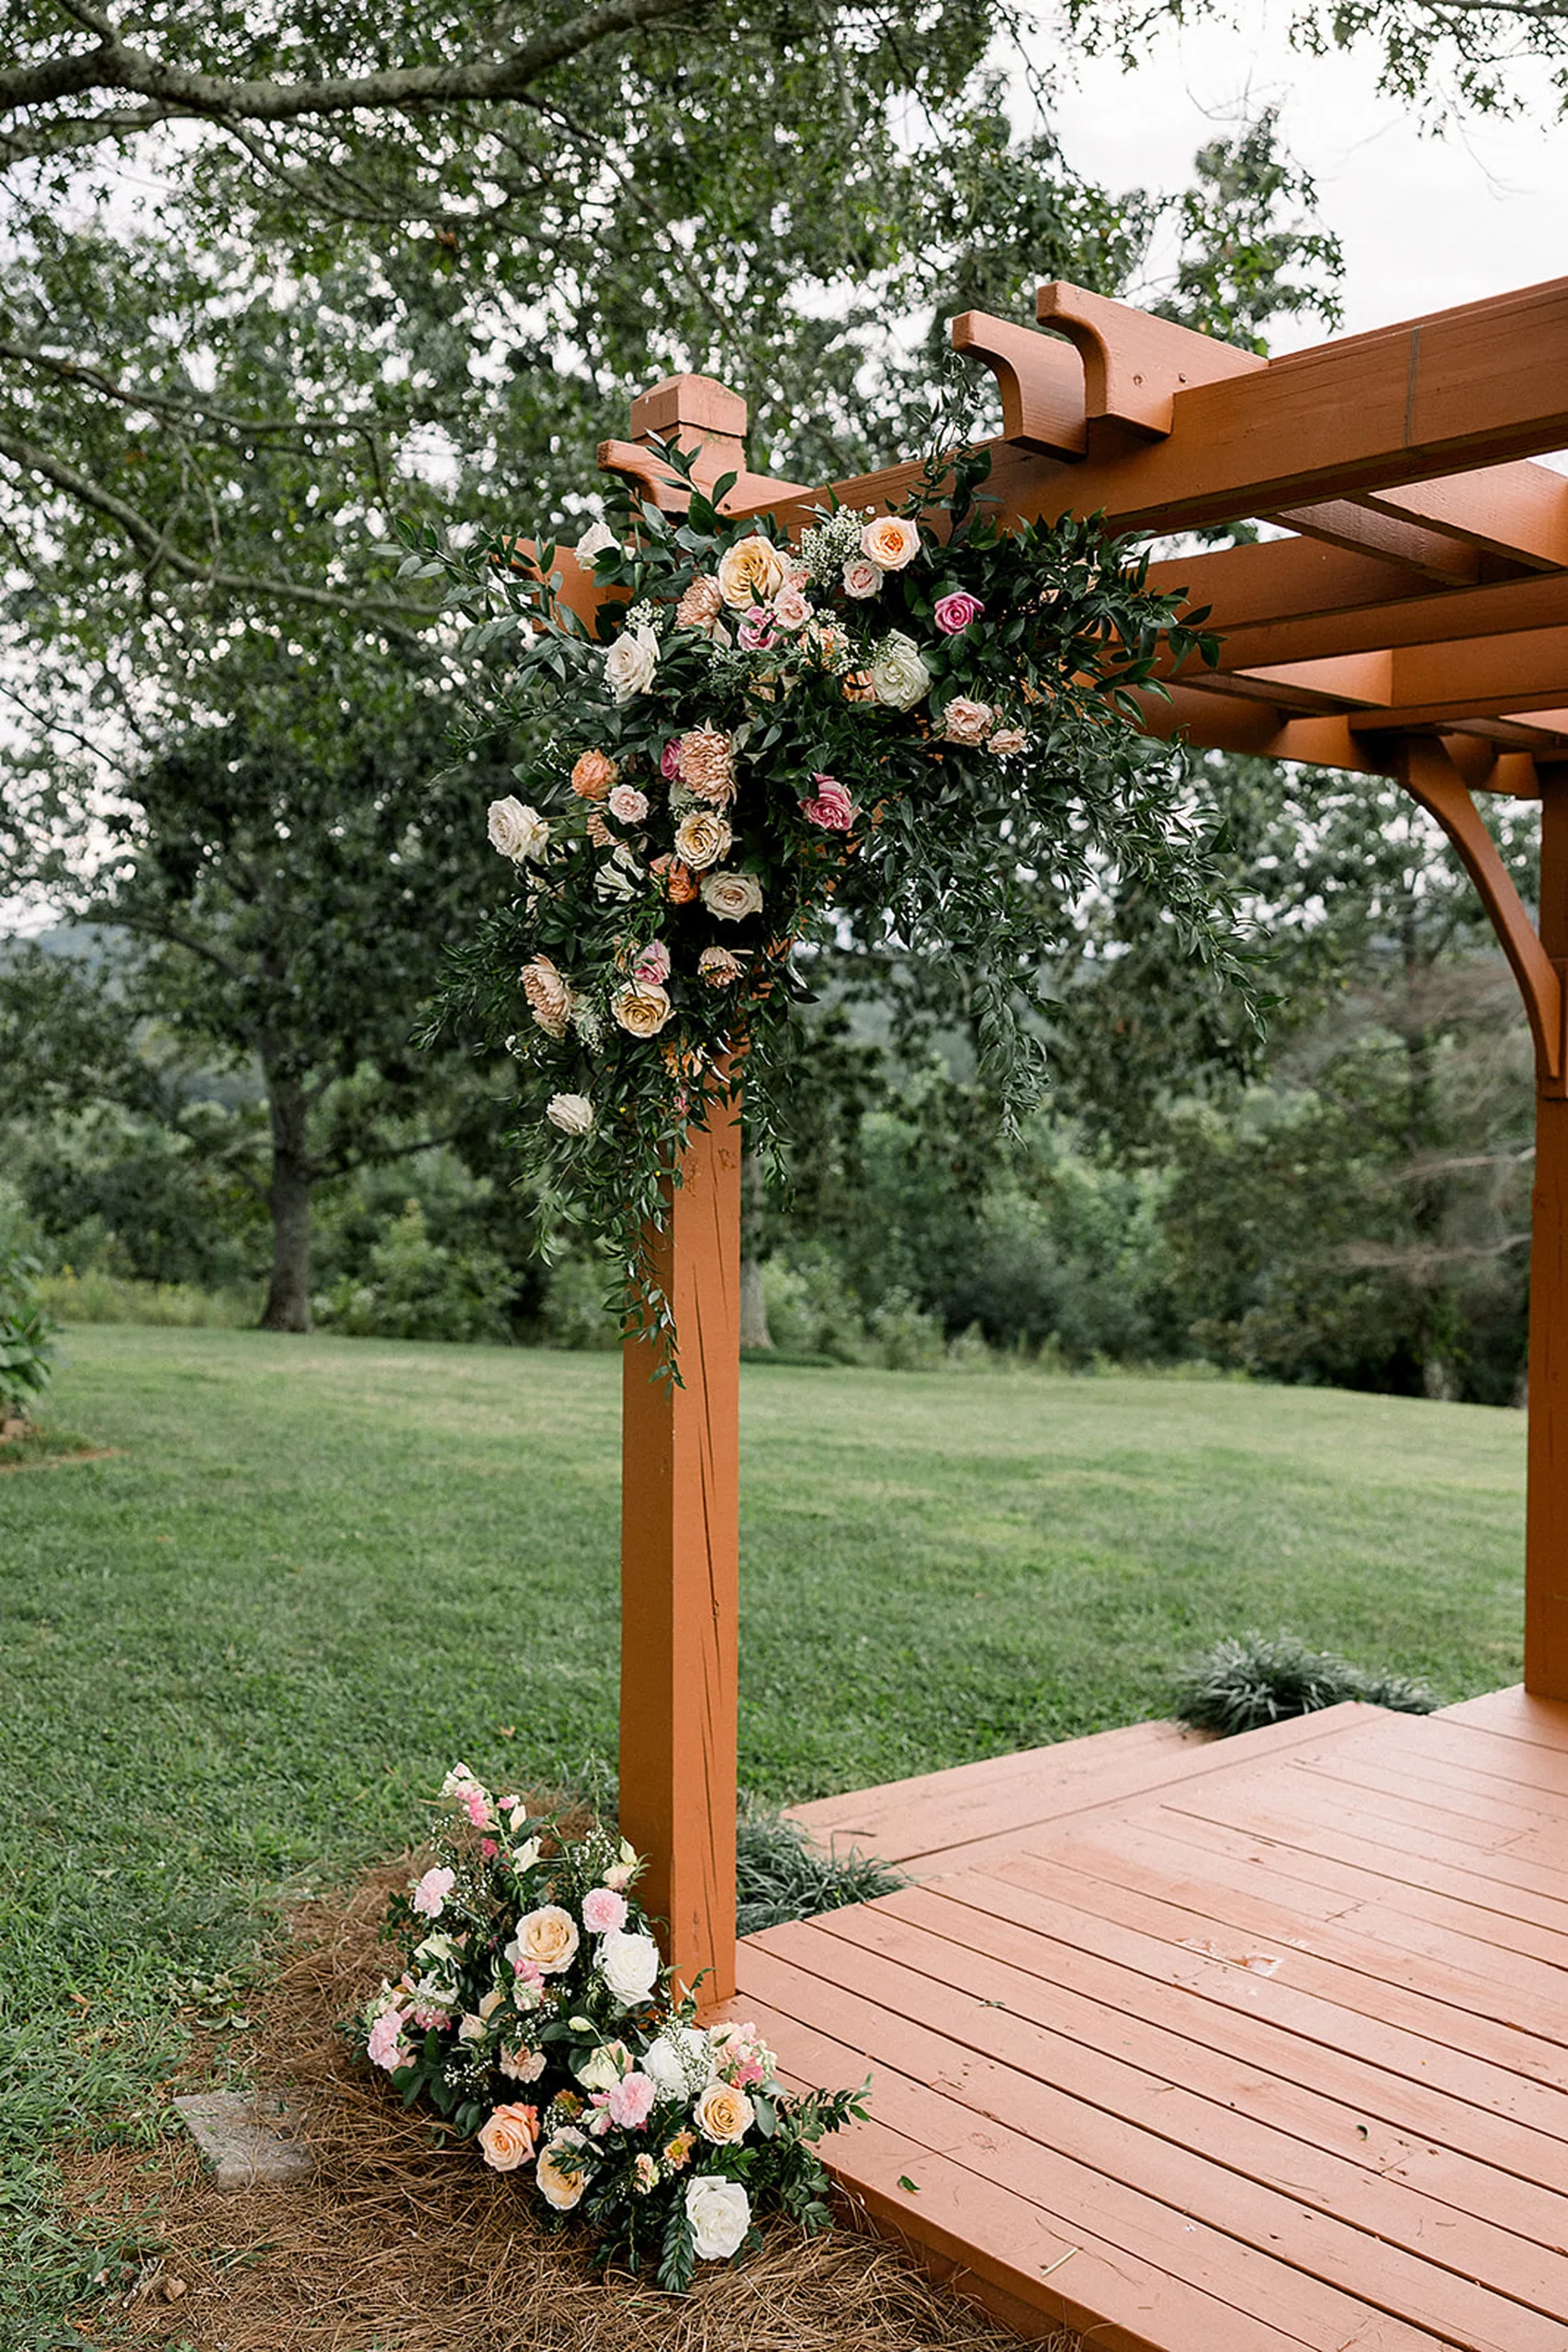 Details of pink and white florals decorating a brown wood pergola for a White Oaks Vineyard wedding ceremony